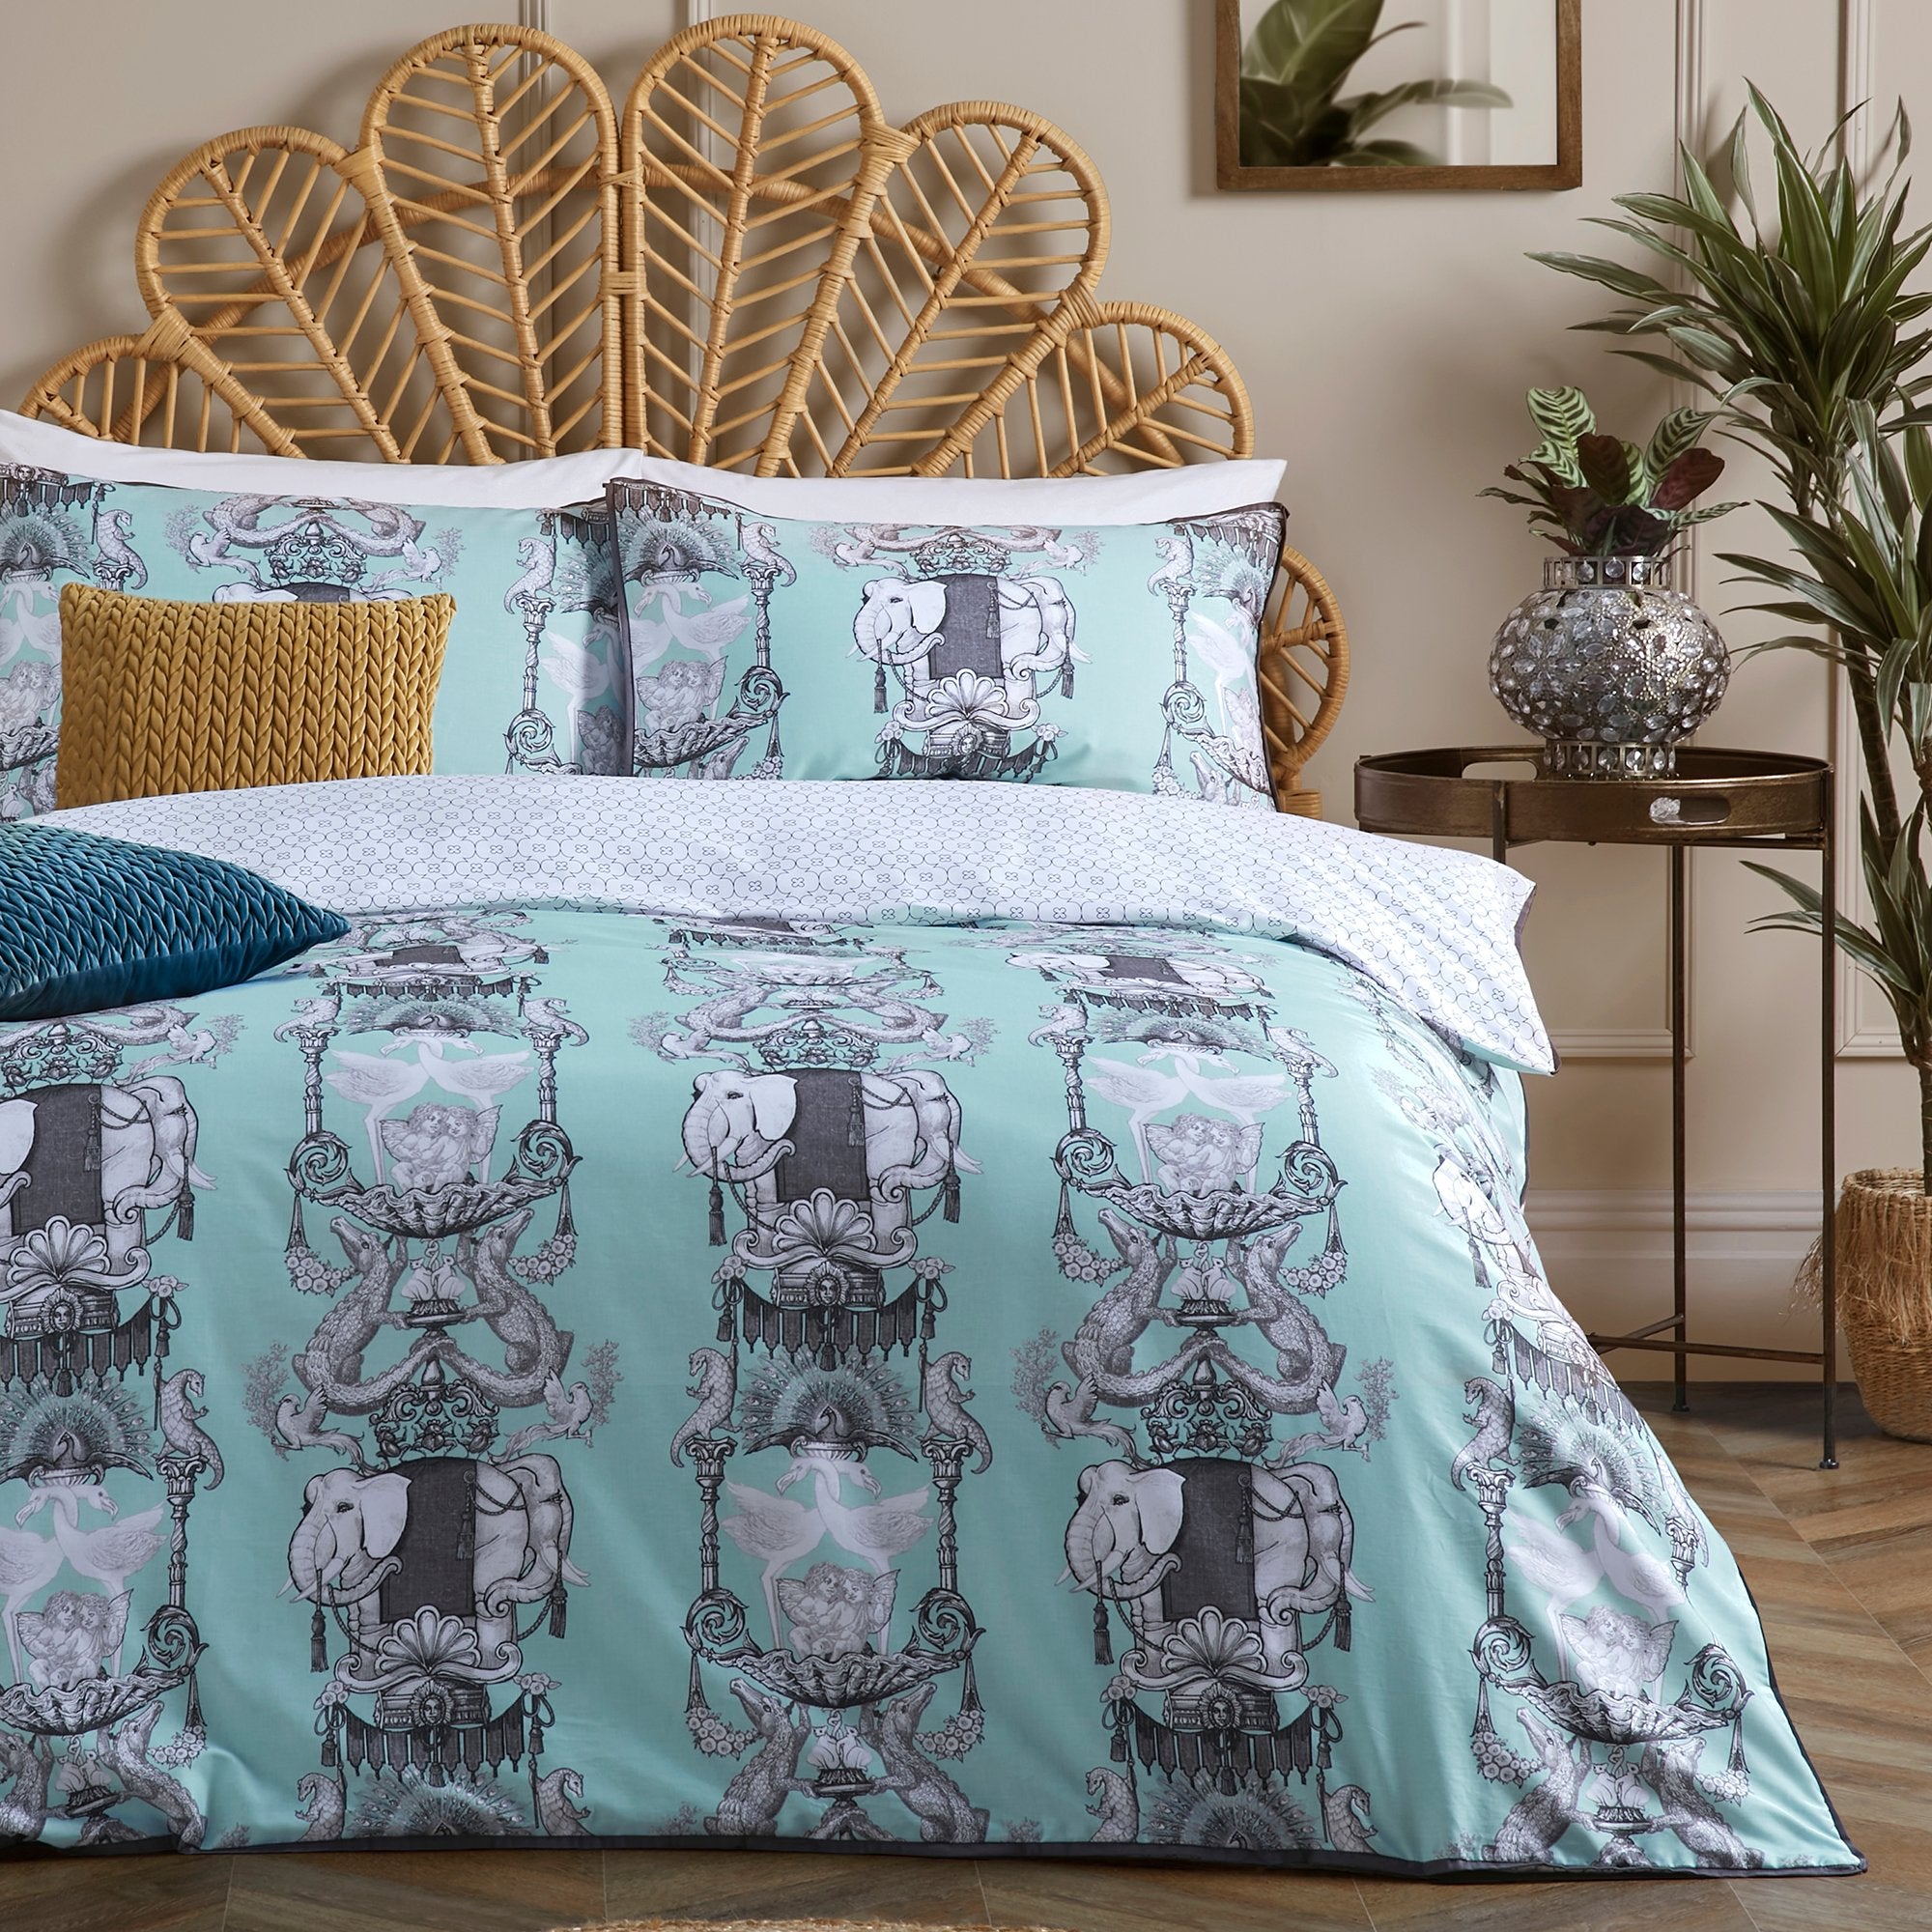 Duvet Cover Set Animalia by Laurence Llewelyn-Bowen in Duck Egg